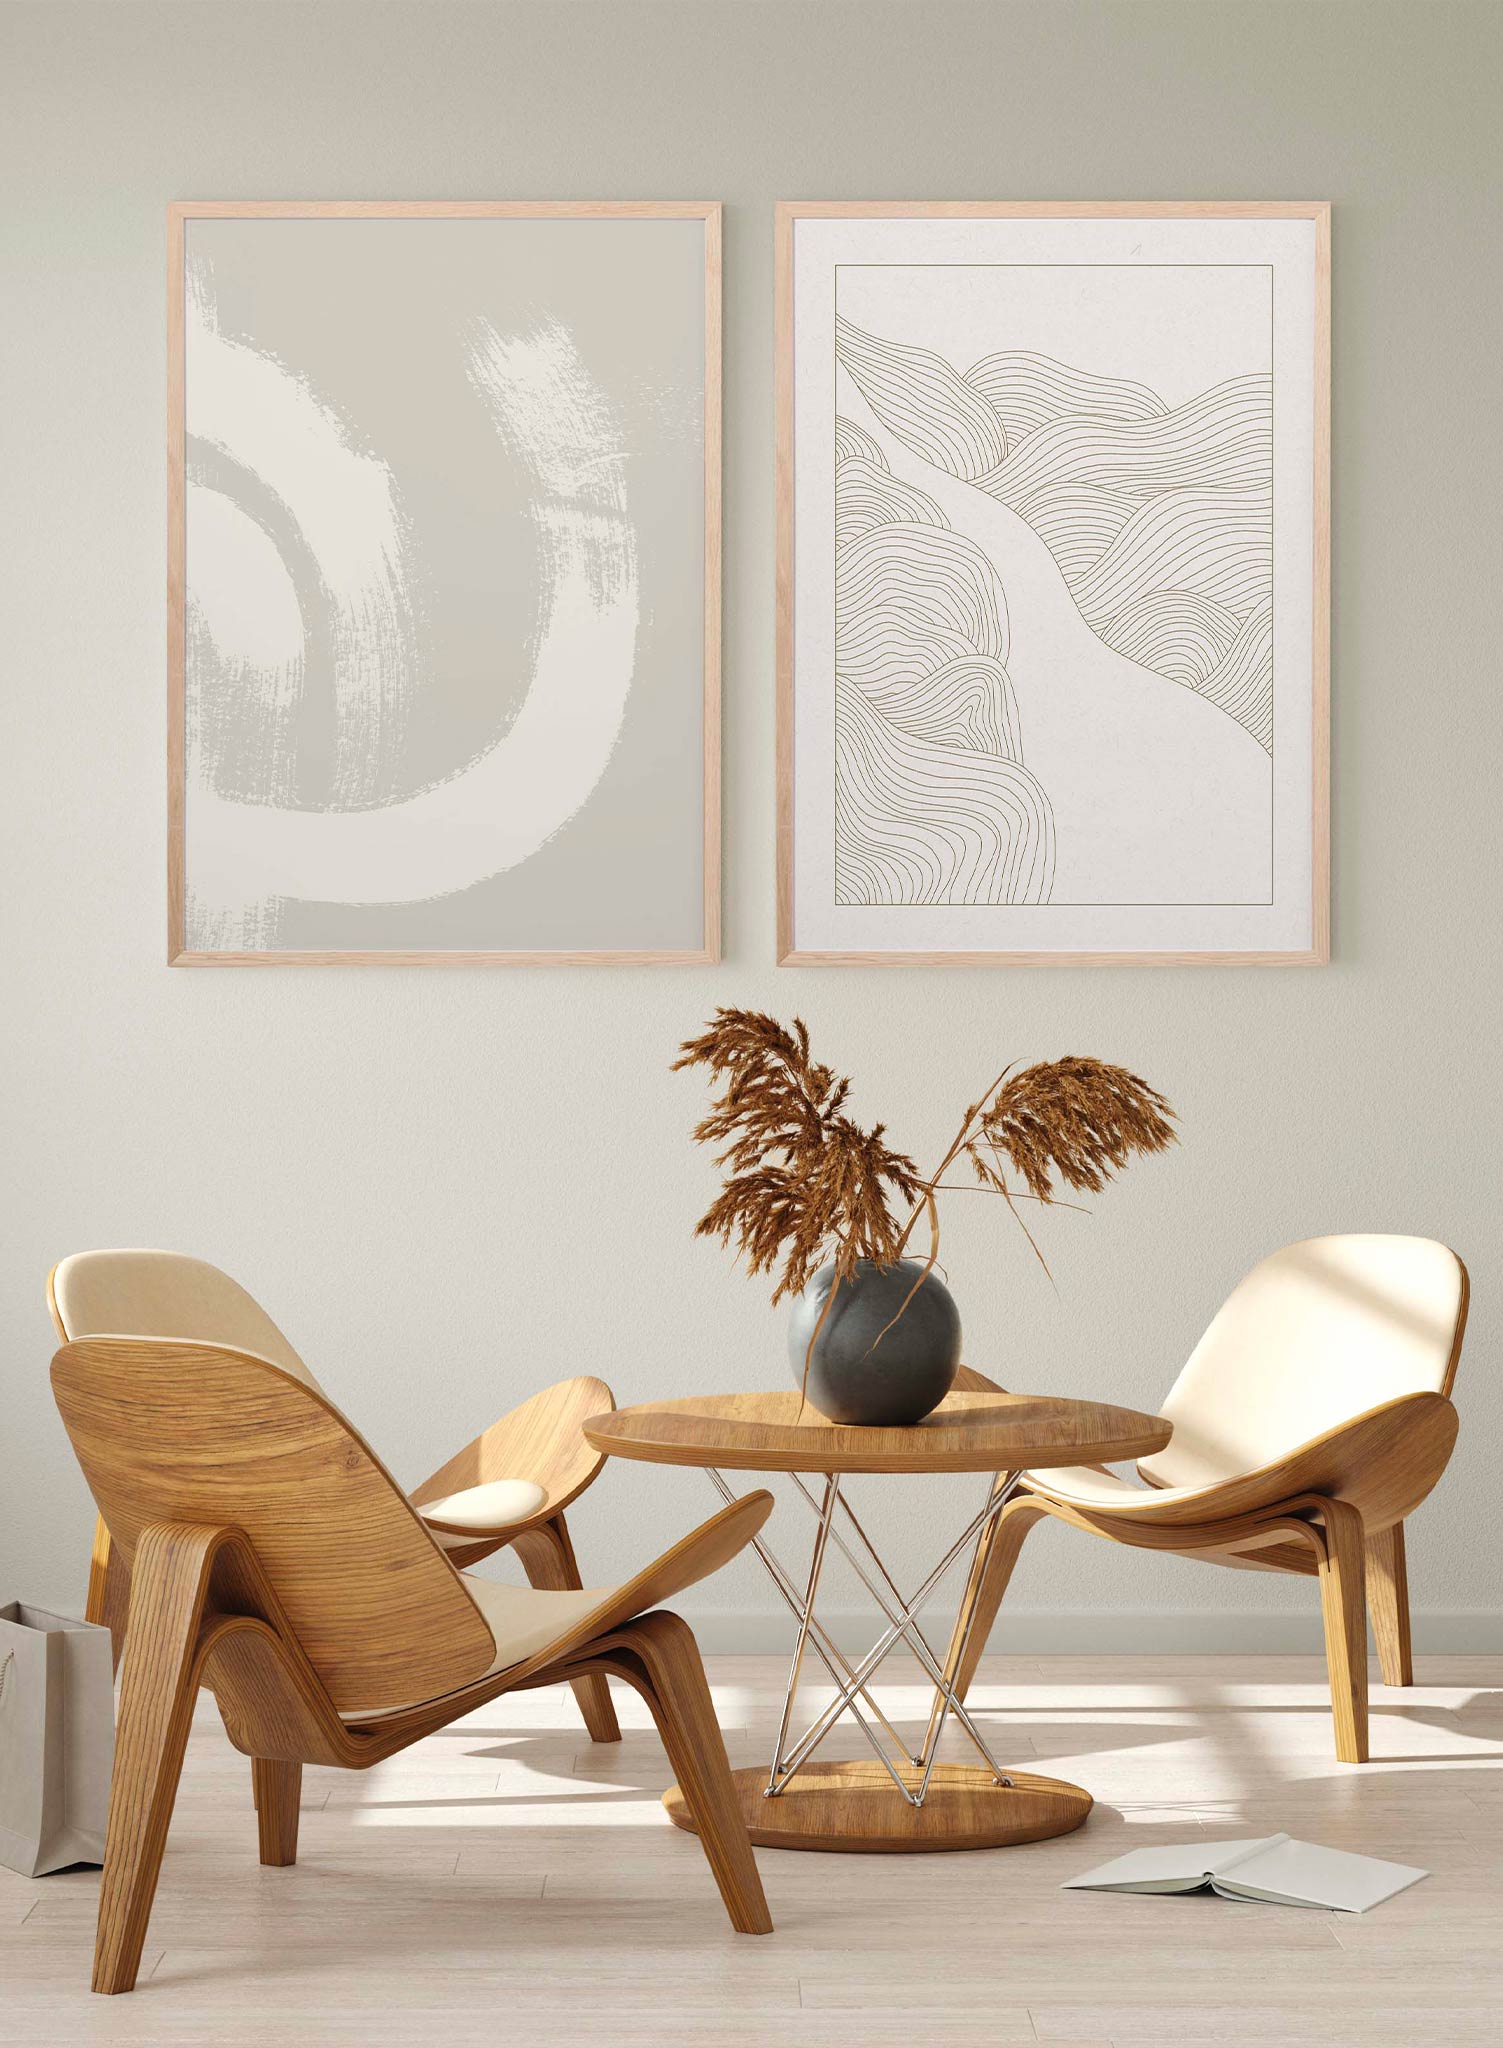 Wave Path is a minimalist illustration by Opposite Wall of a combination of curved lines resembling a path and the surrounding circular waves.